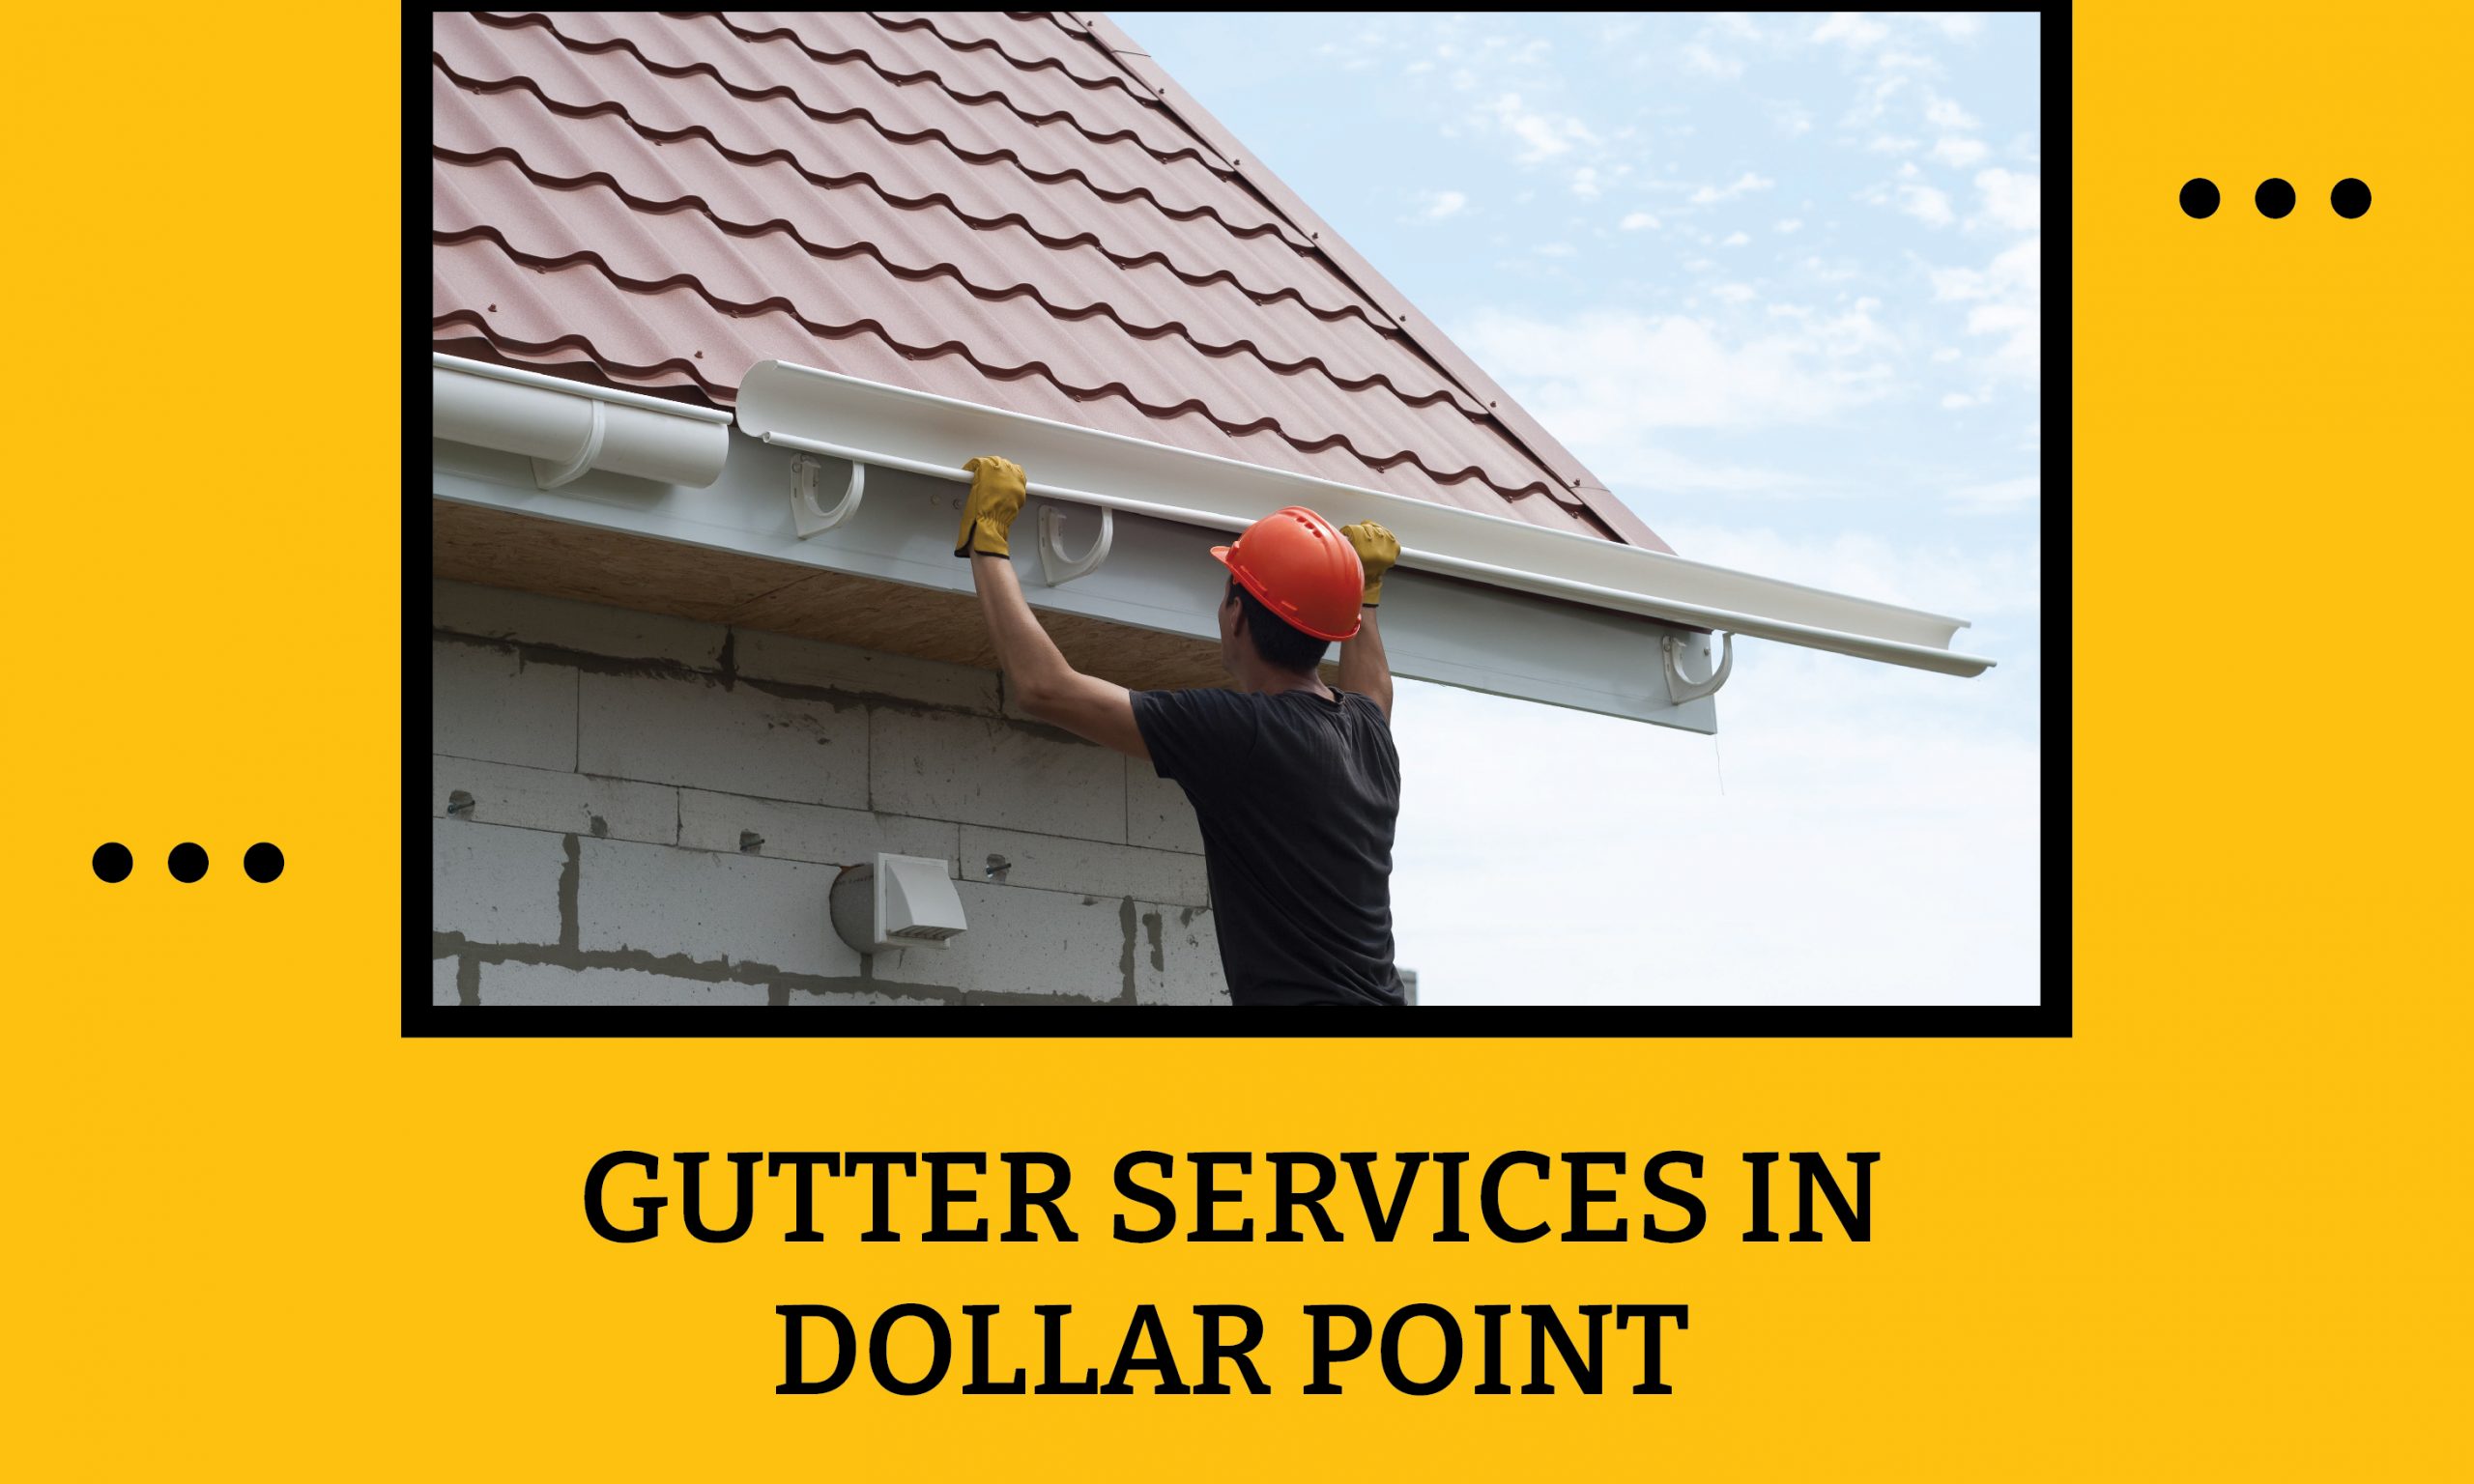 Top-Notch Rain Gutter Cleaning & Installation Services in Dollar Point